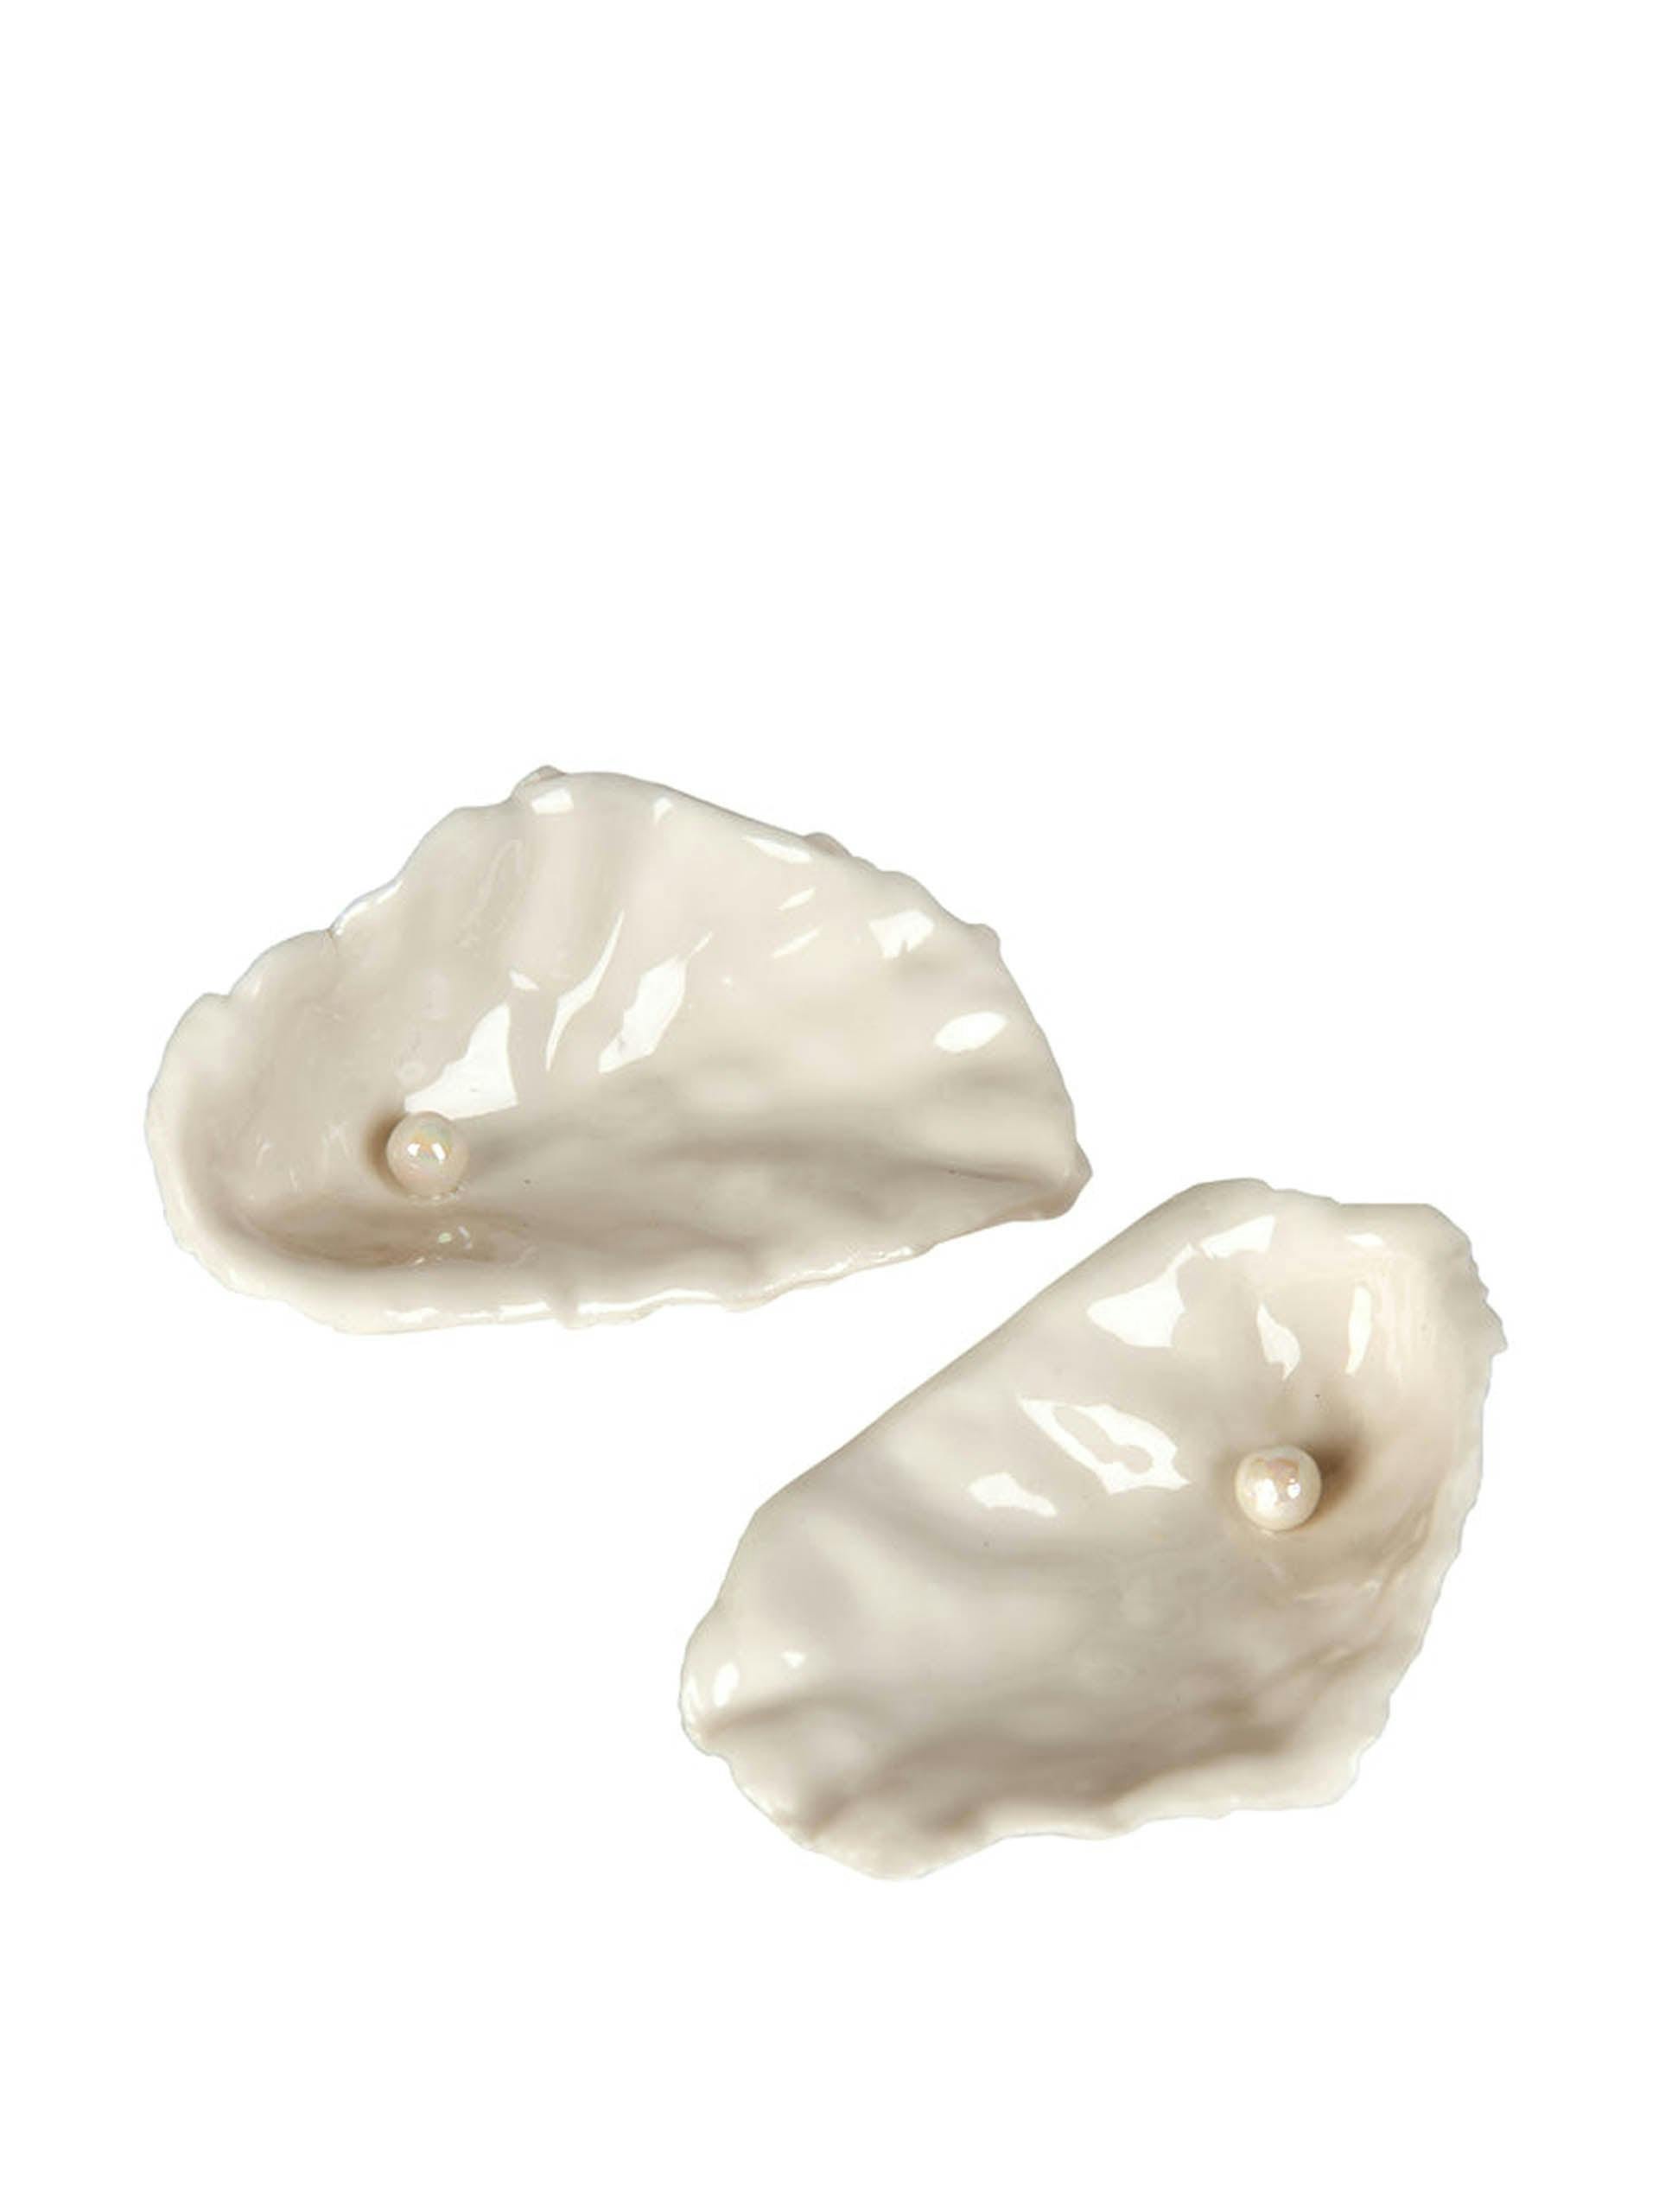 Pair of oyster salt and pepper cellars